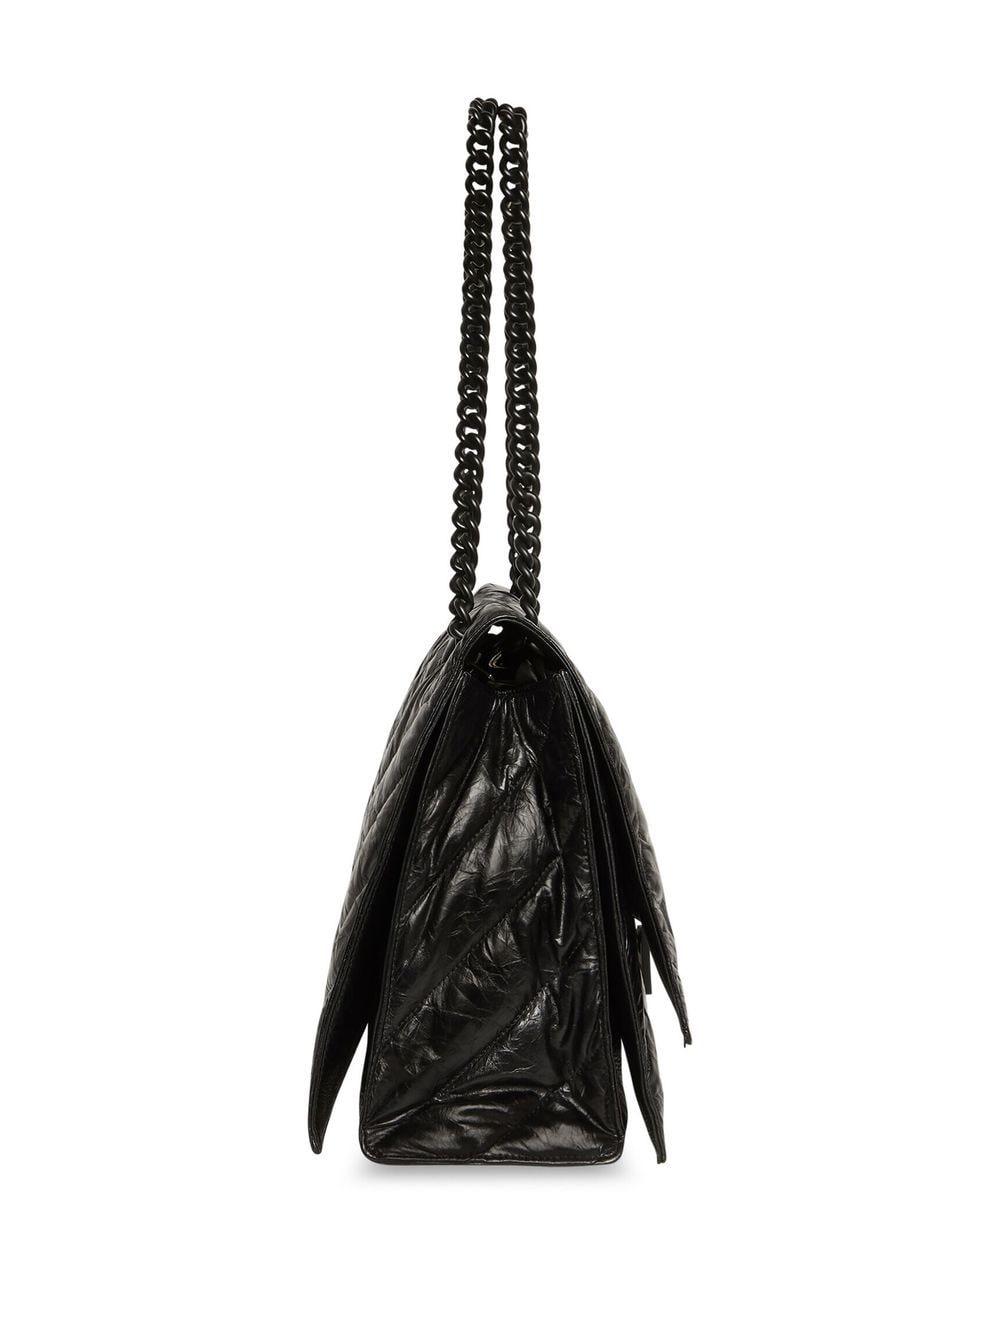 Balenciaga Leather Crush Quilted Shoulder Bag in Black | Lyst